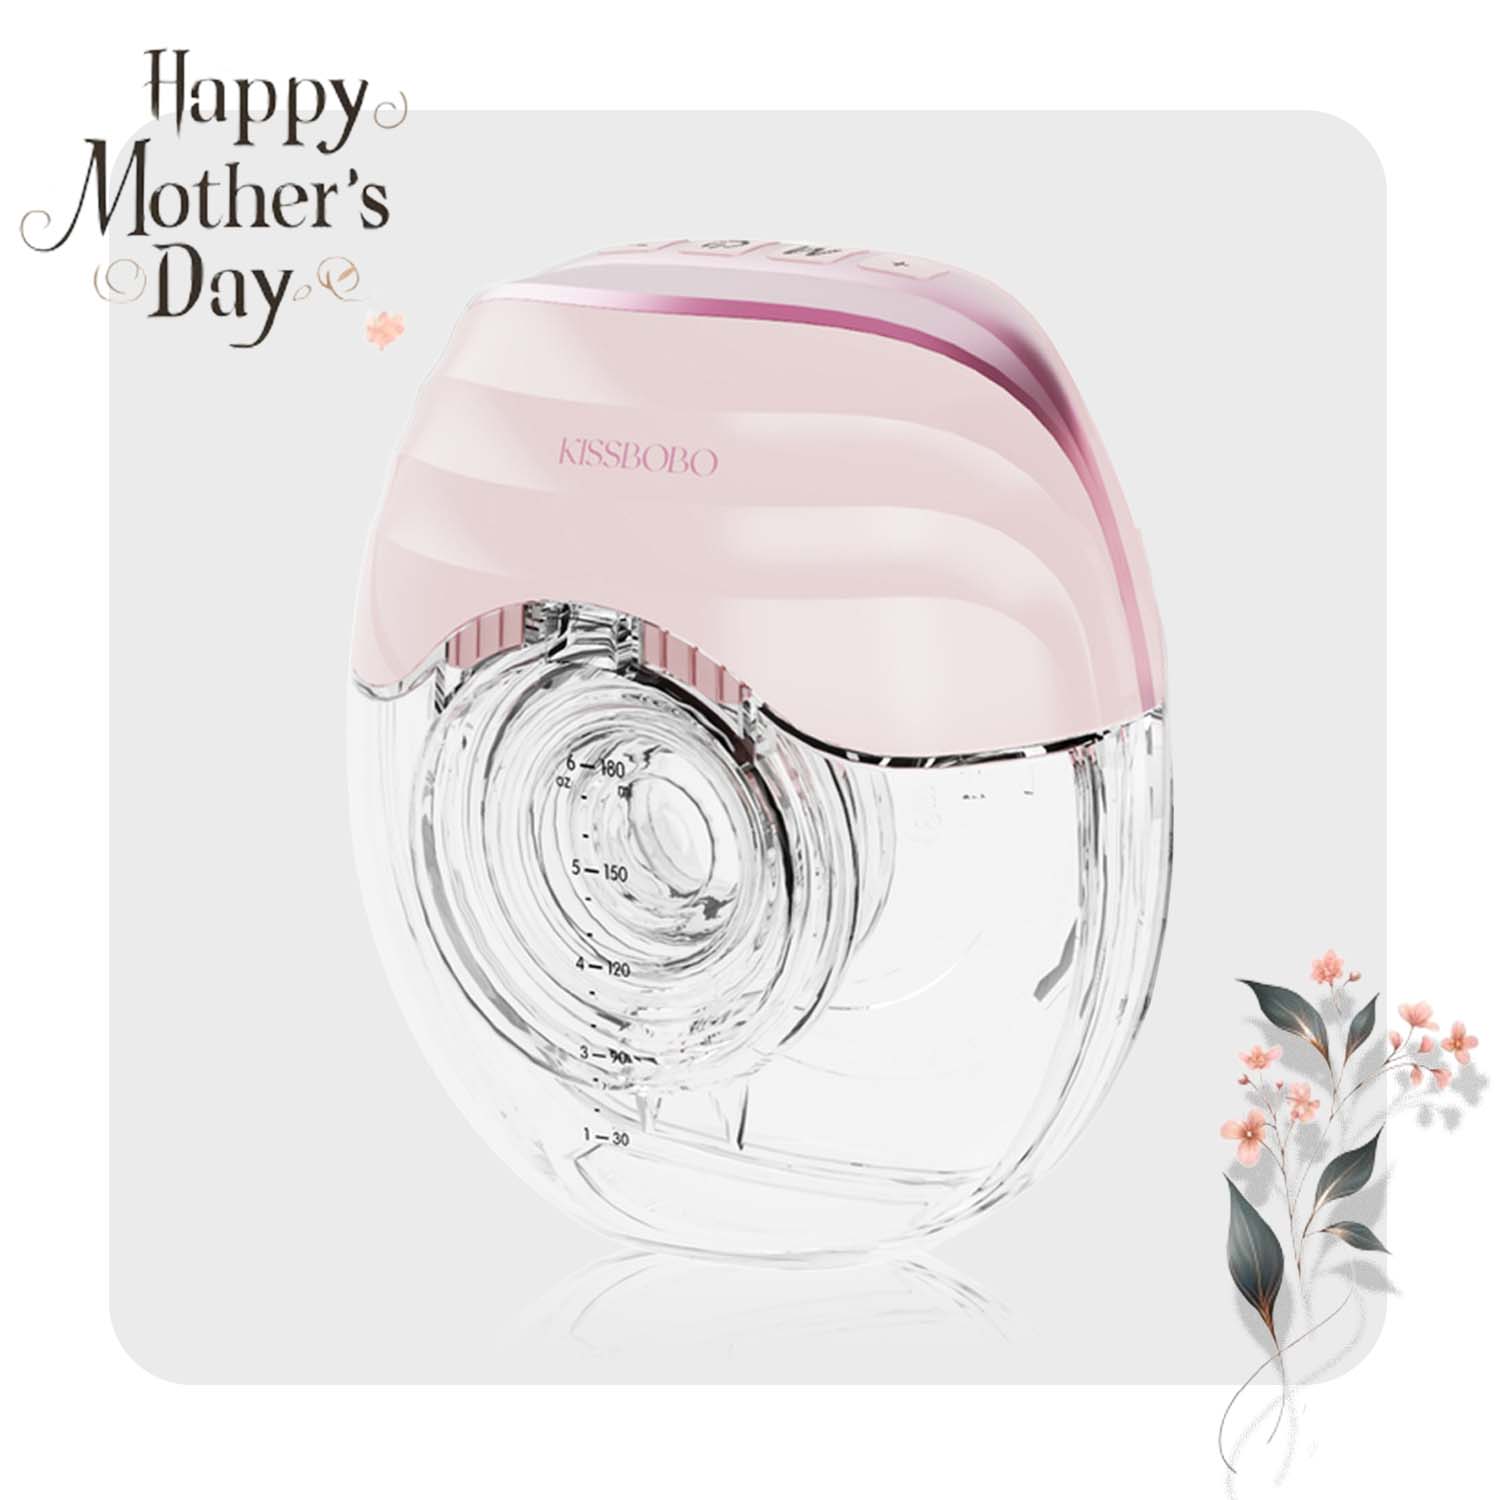 Mother's Gift for expectant mothers,GLE10 Mother's Day Gift for pregnant mothers, Mother's Day surprise -KISSBOBO Breast Pump 